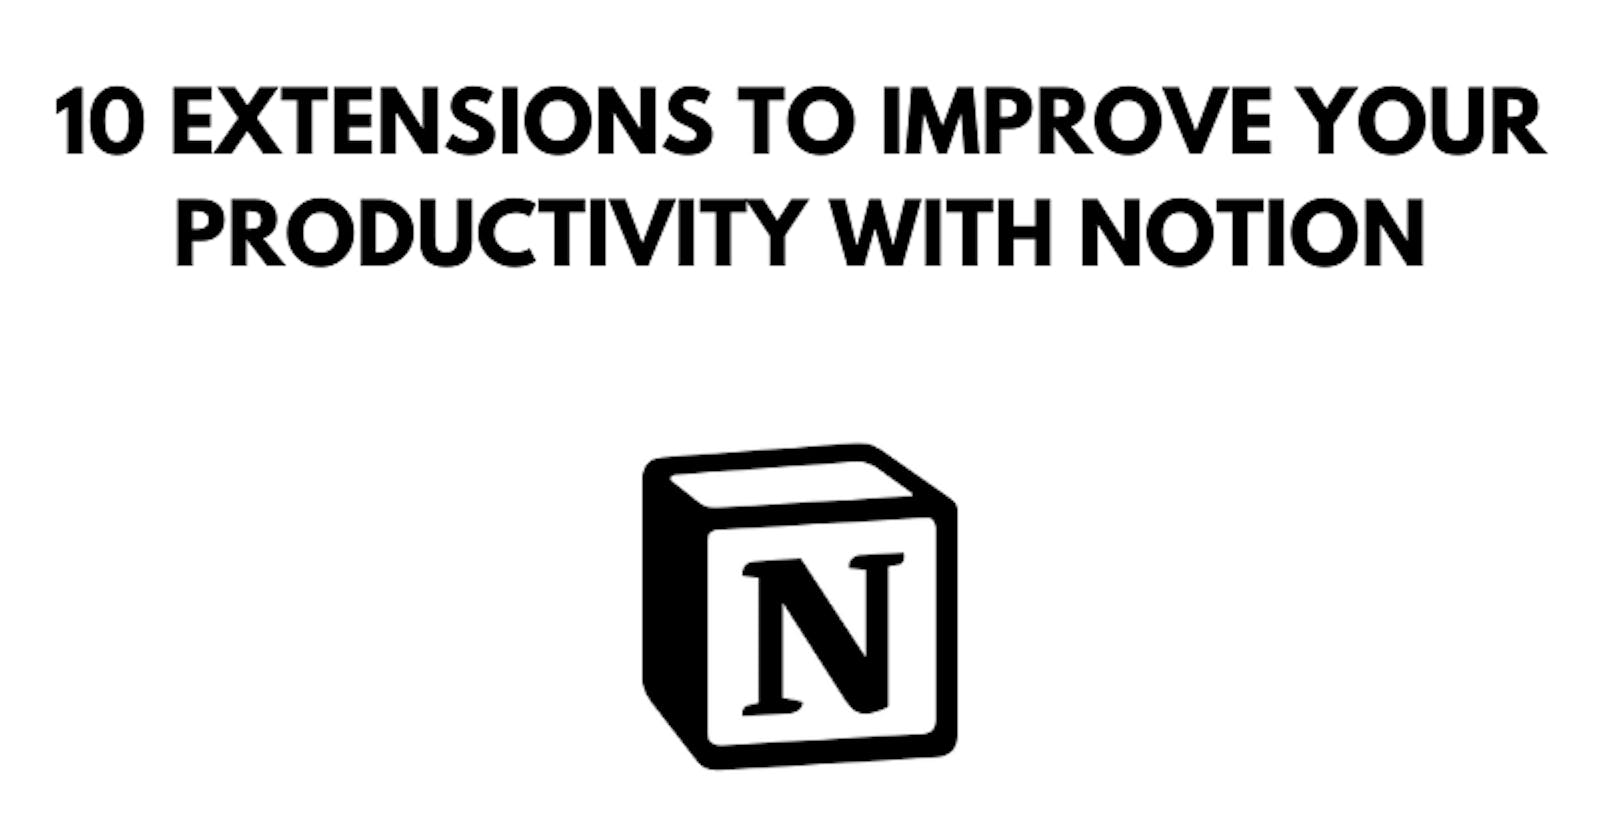 10 Extensions to Improve your Productivity with Notion